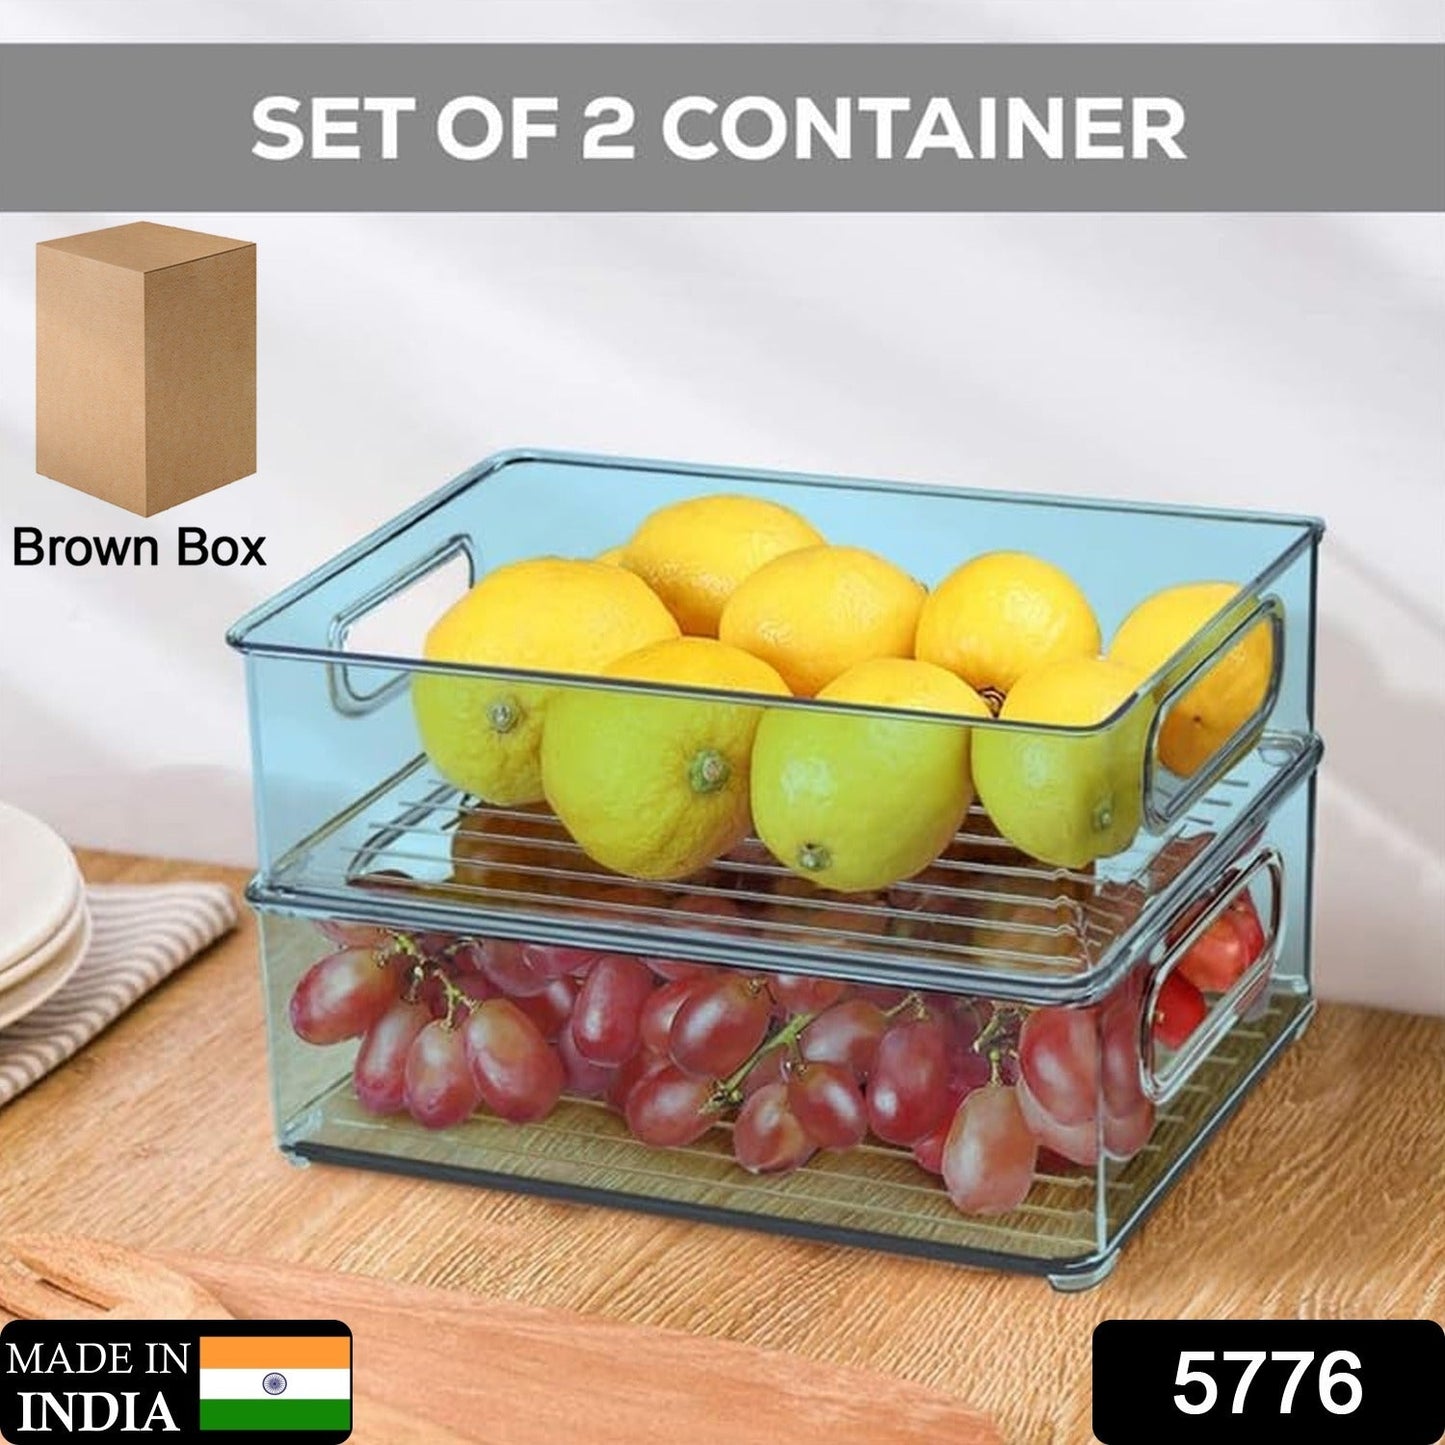 5776 Plastic Refrigerator Organizer Bins, Set Of 2 Stackable Fridge Organizers with Handle, Clear Organizing Food Fruit Vegetables Pantry Storage Bins for Freezer kitchen Cabinet Organization and Storage (2 Pcs Set Mix Color)